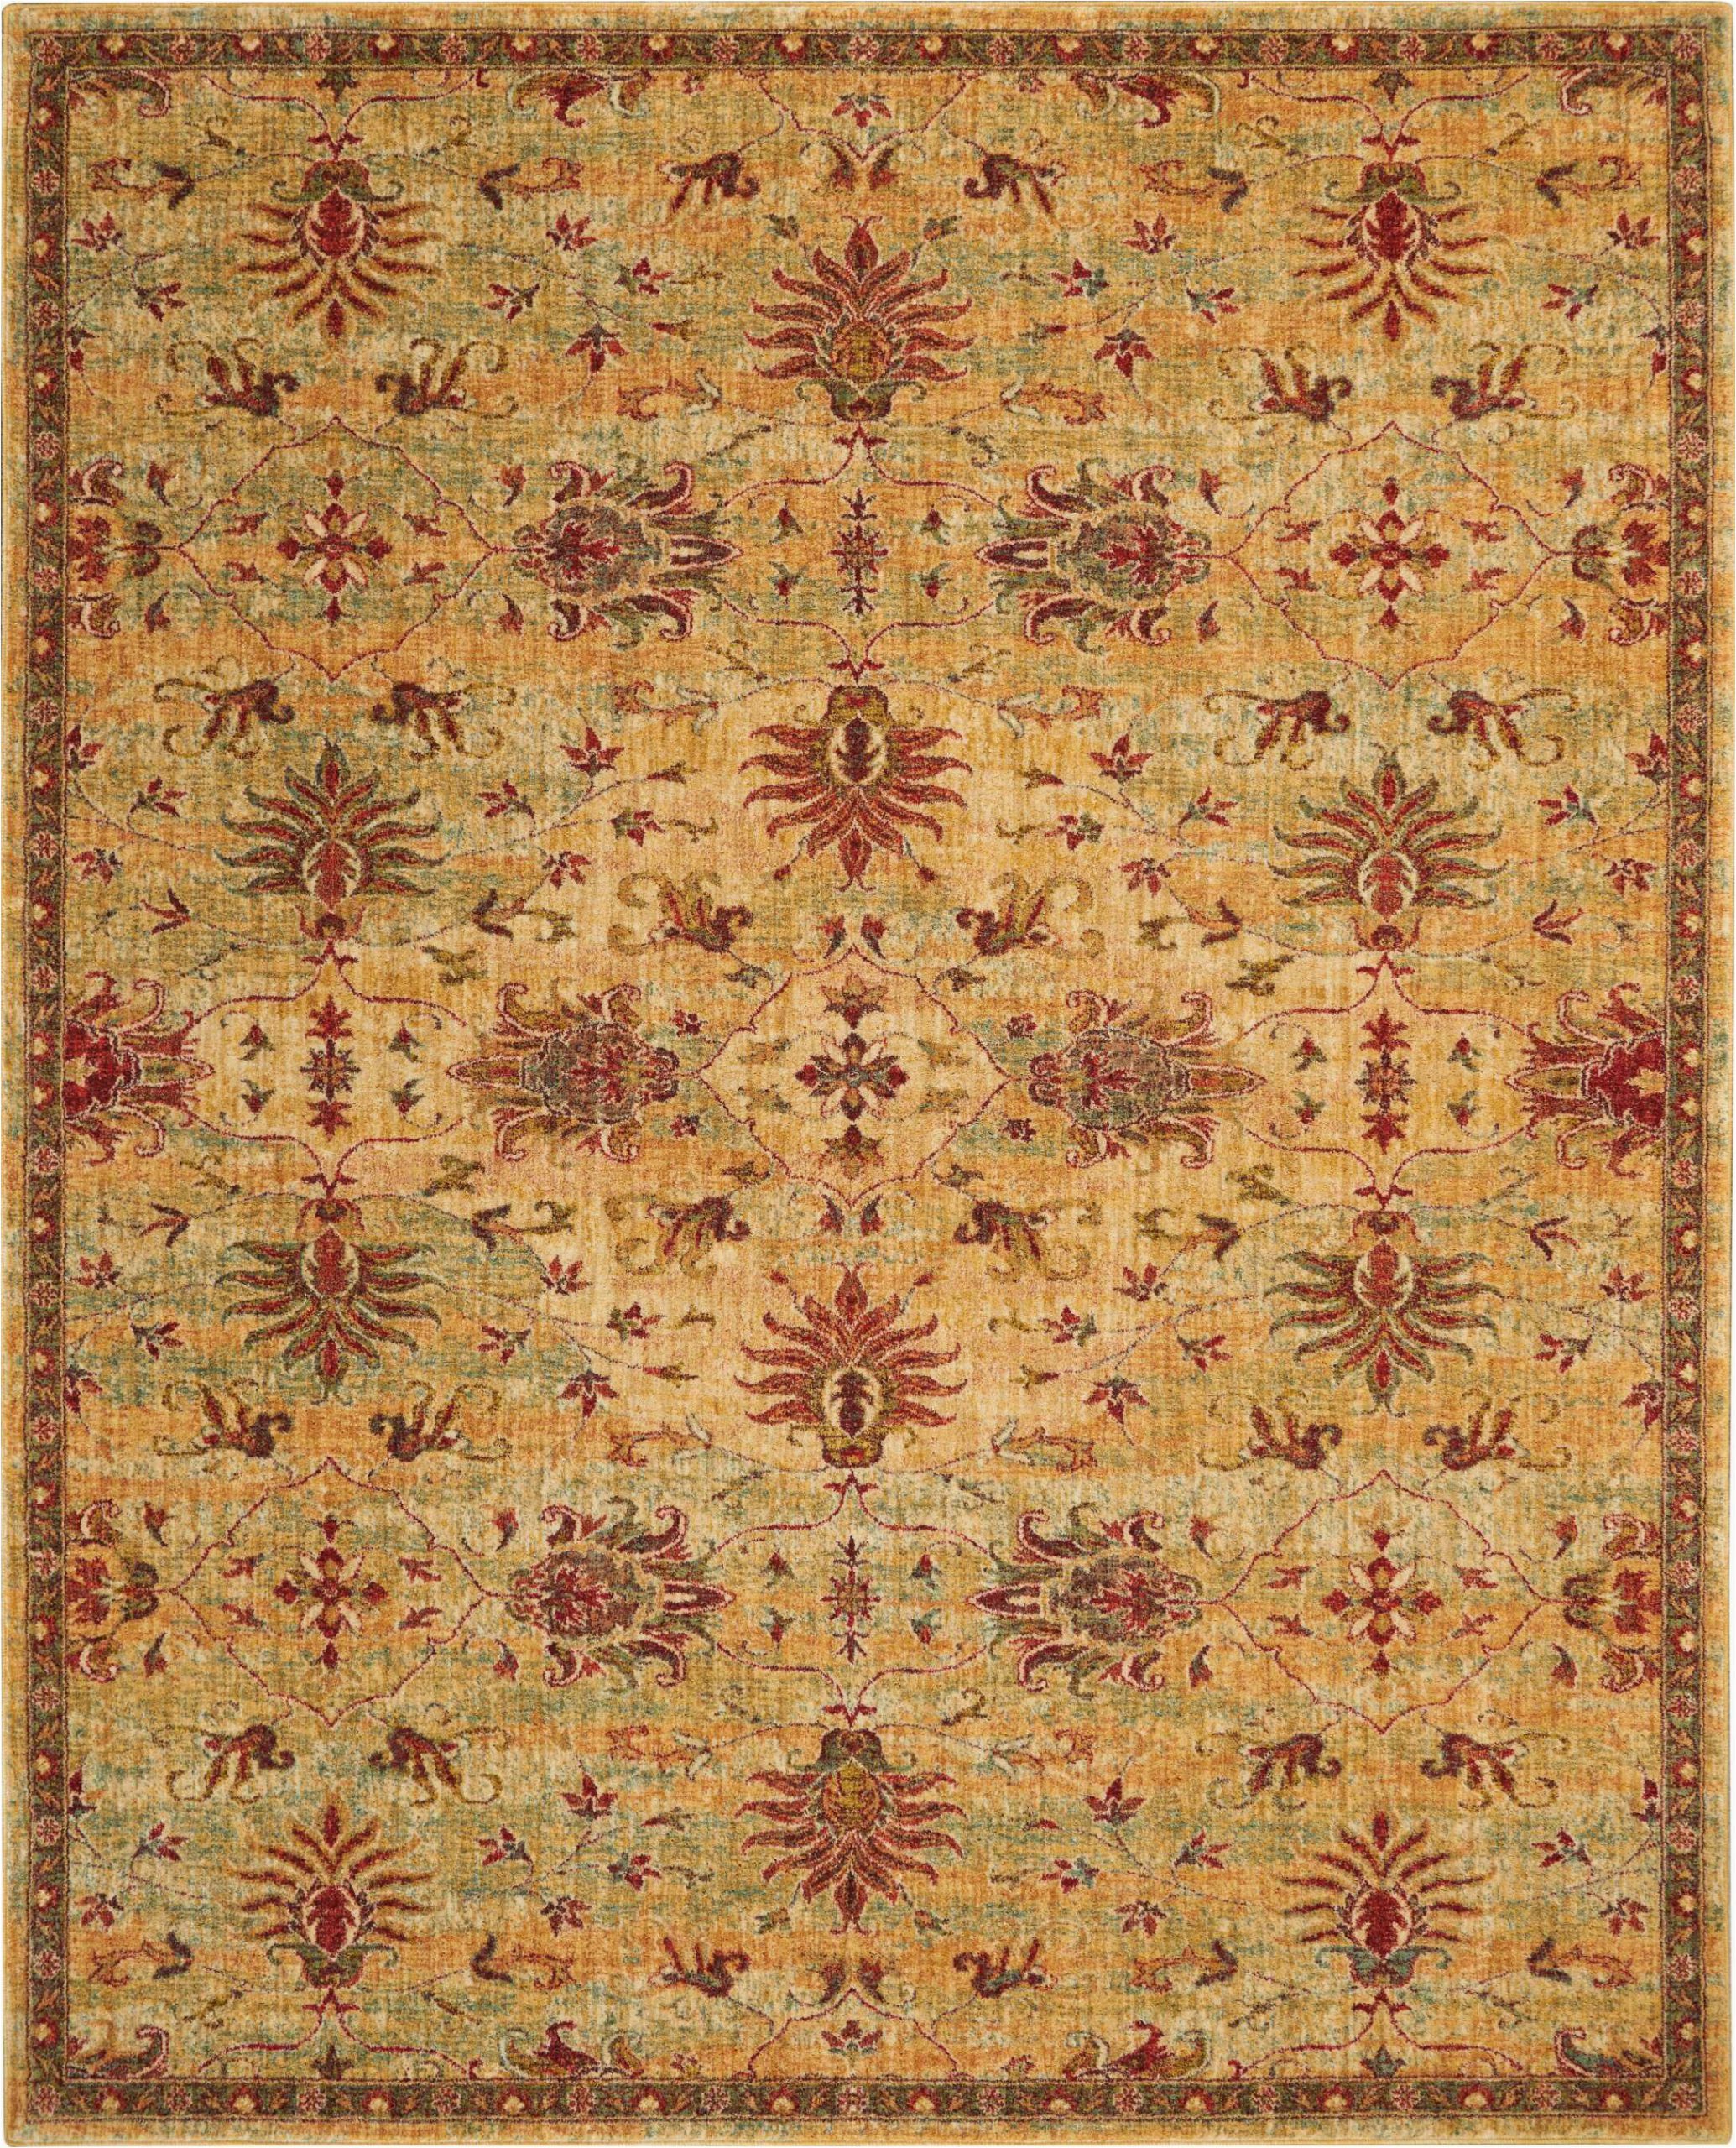 Cream and Red area Rugs Dufresne Cream Red area Rug